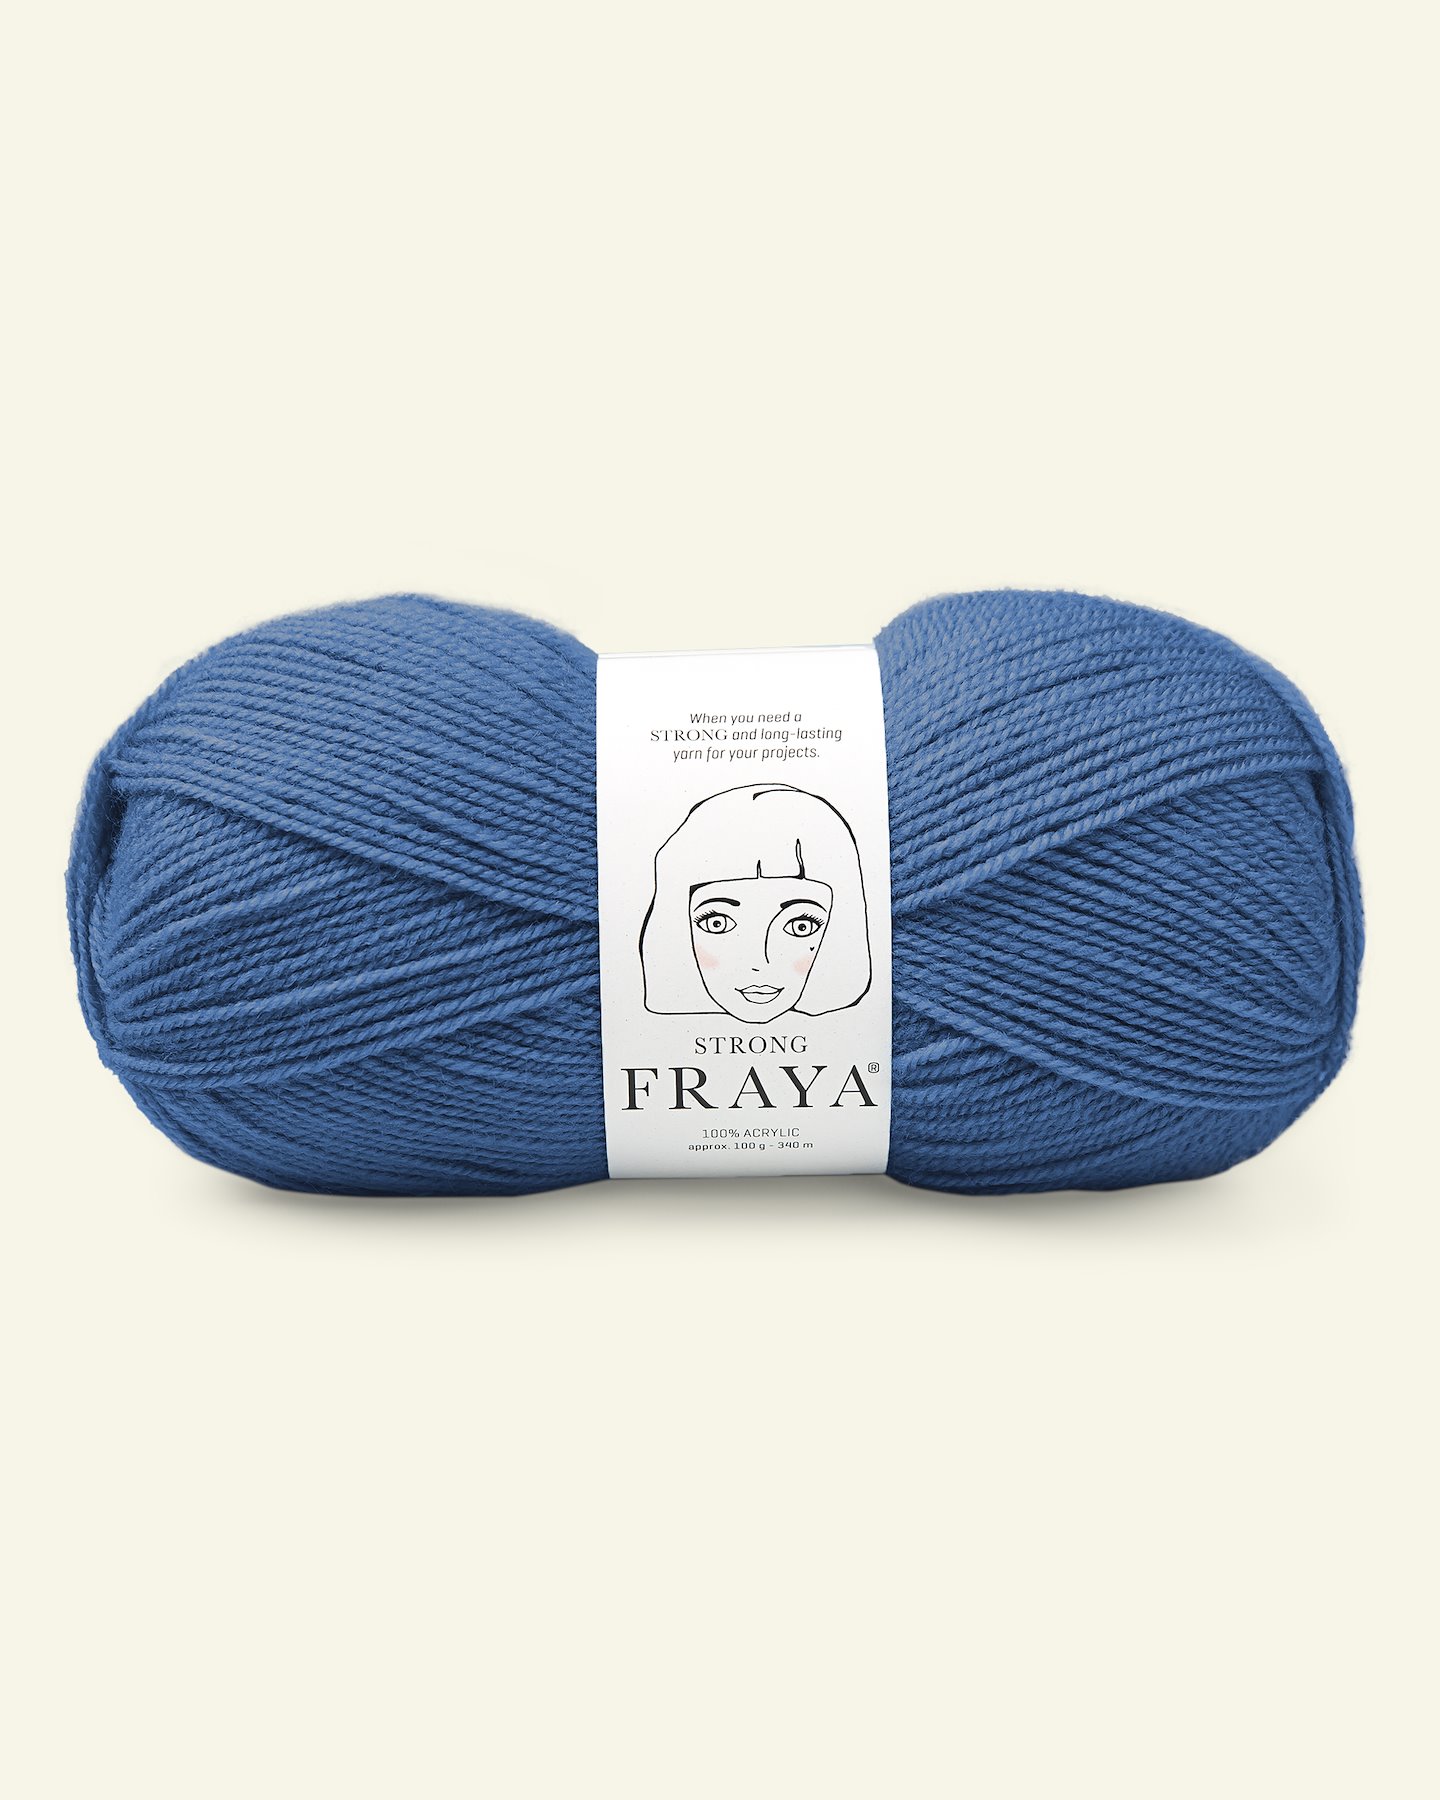 FRAYA, Wolle Acrylgarn "Strong", lavendel 90000892_pack